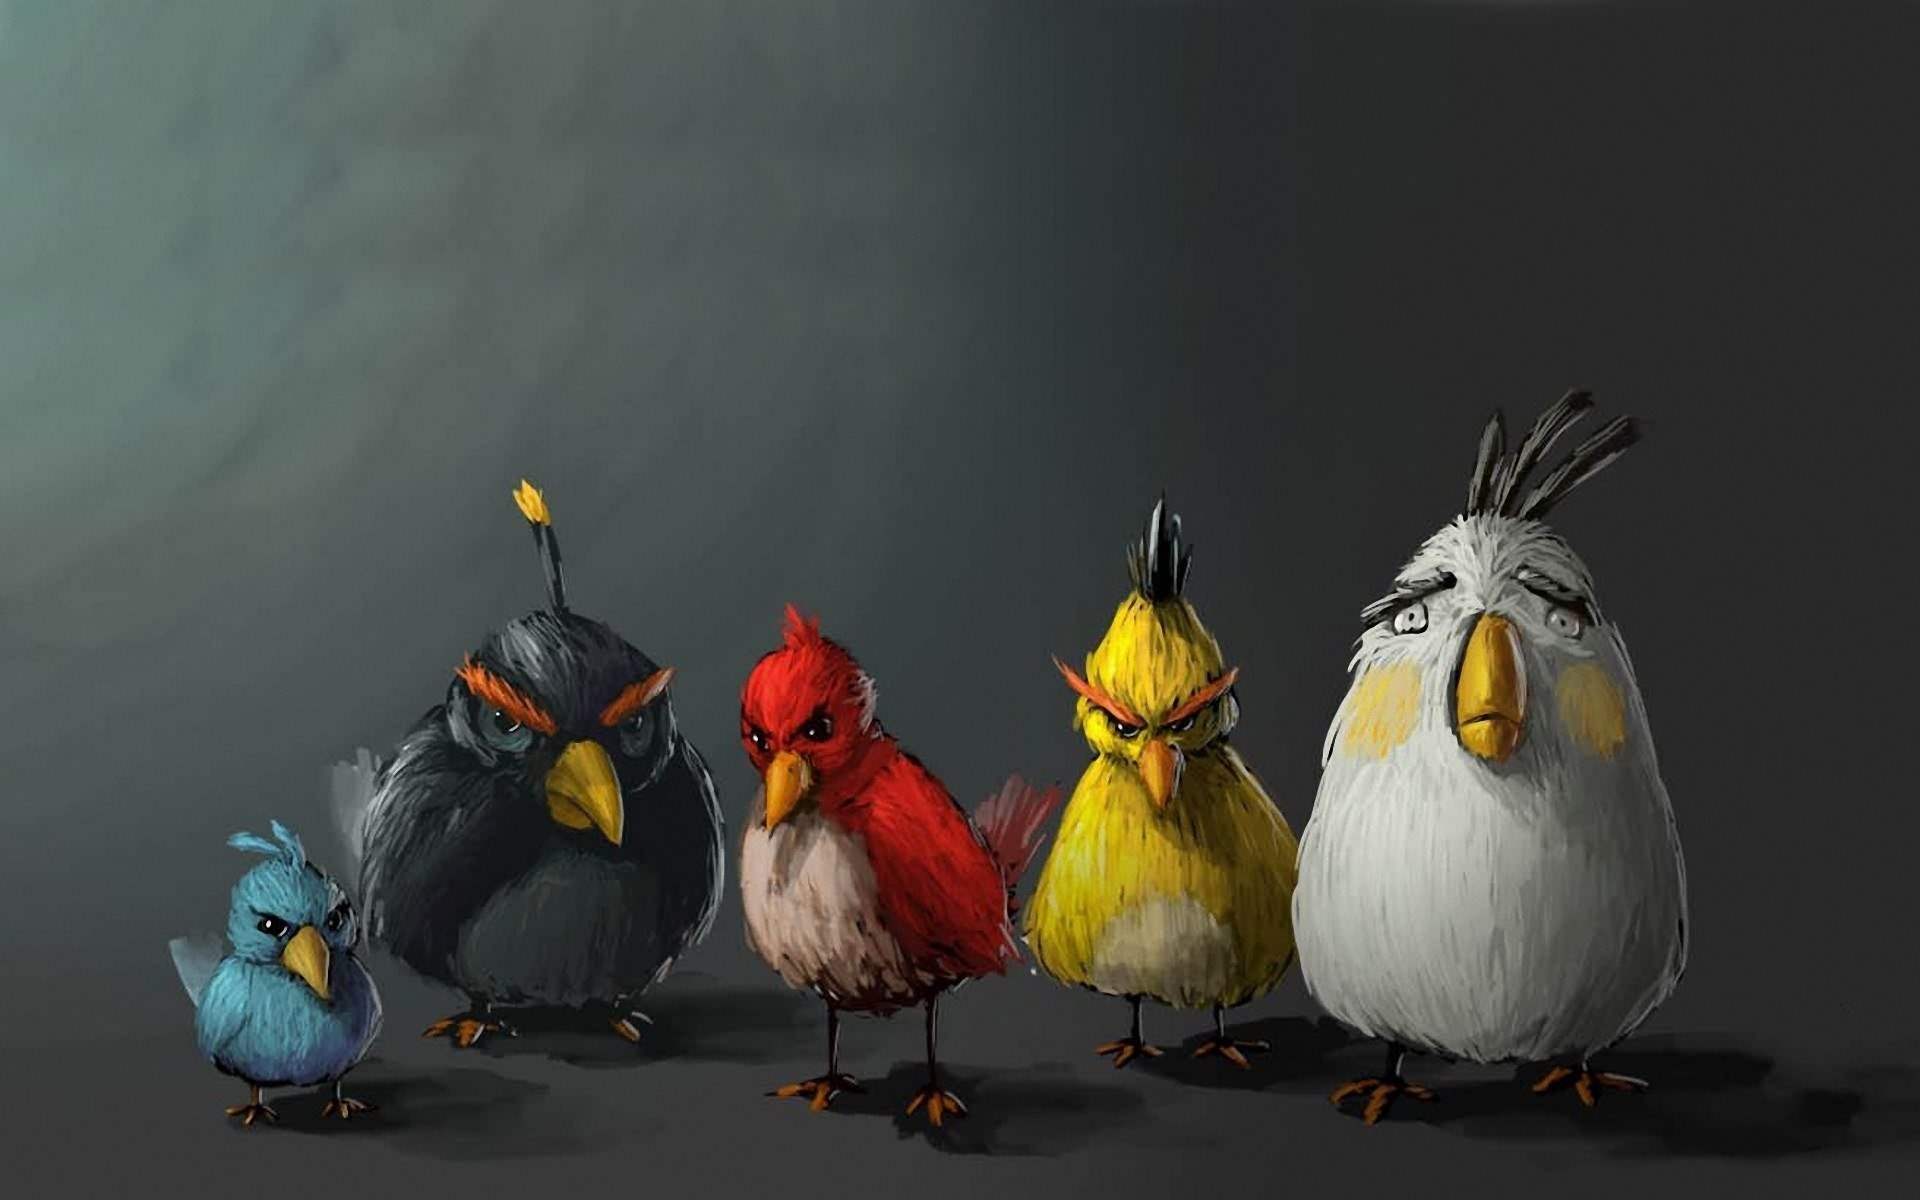 Drawn Angry Birds wallpapers and images   wallpapers pictures photos